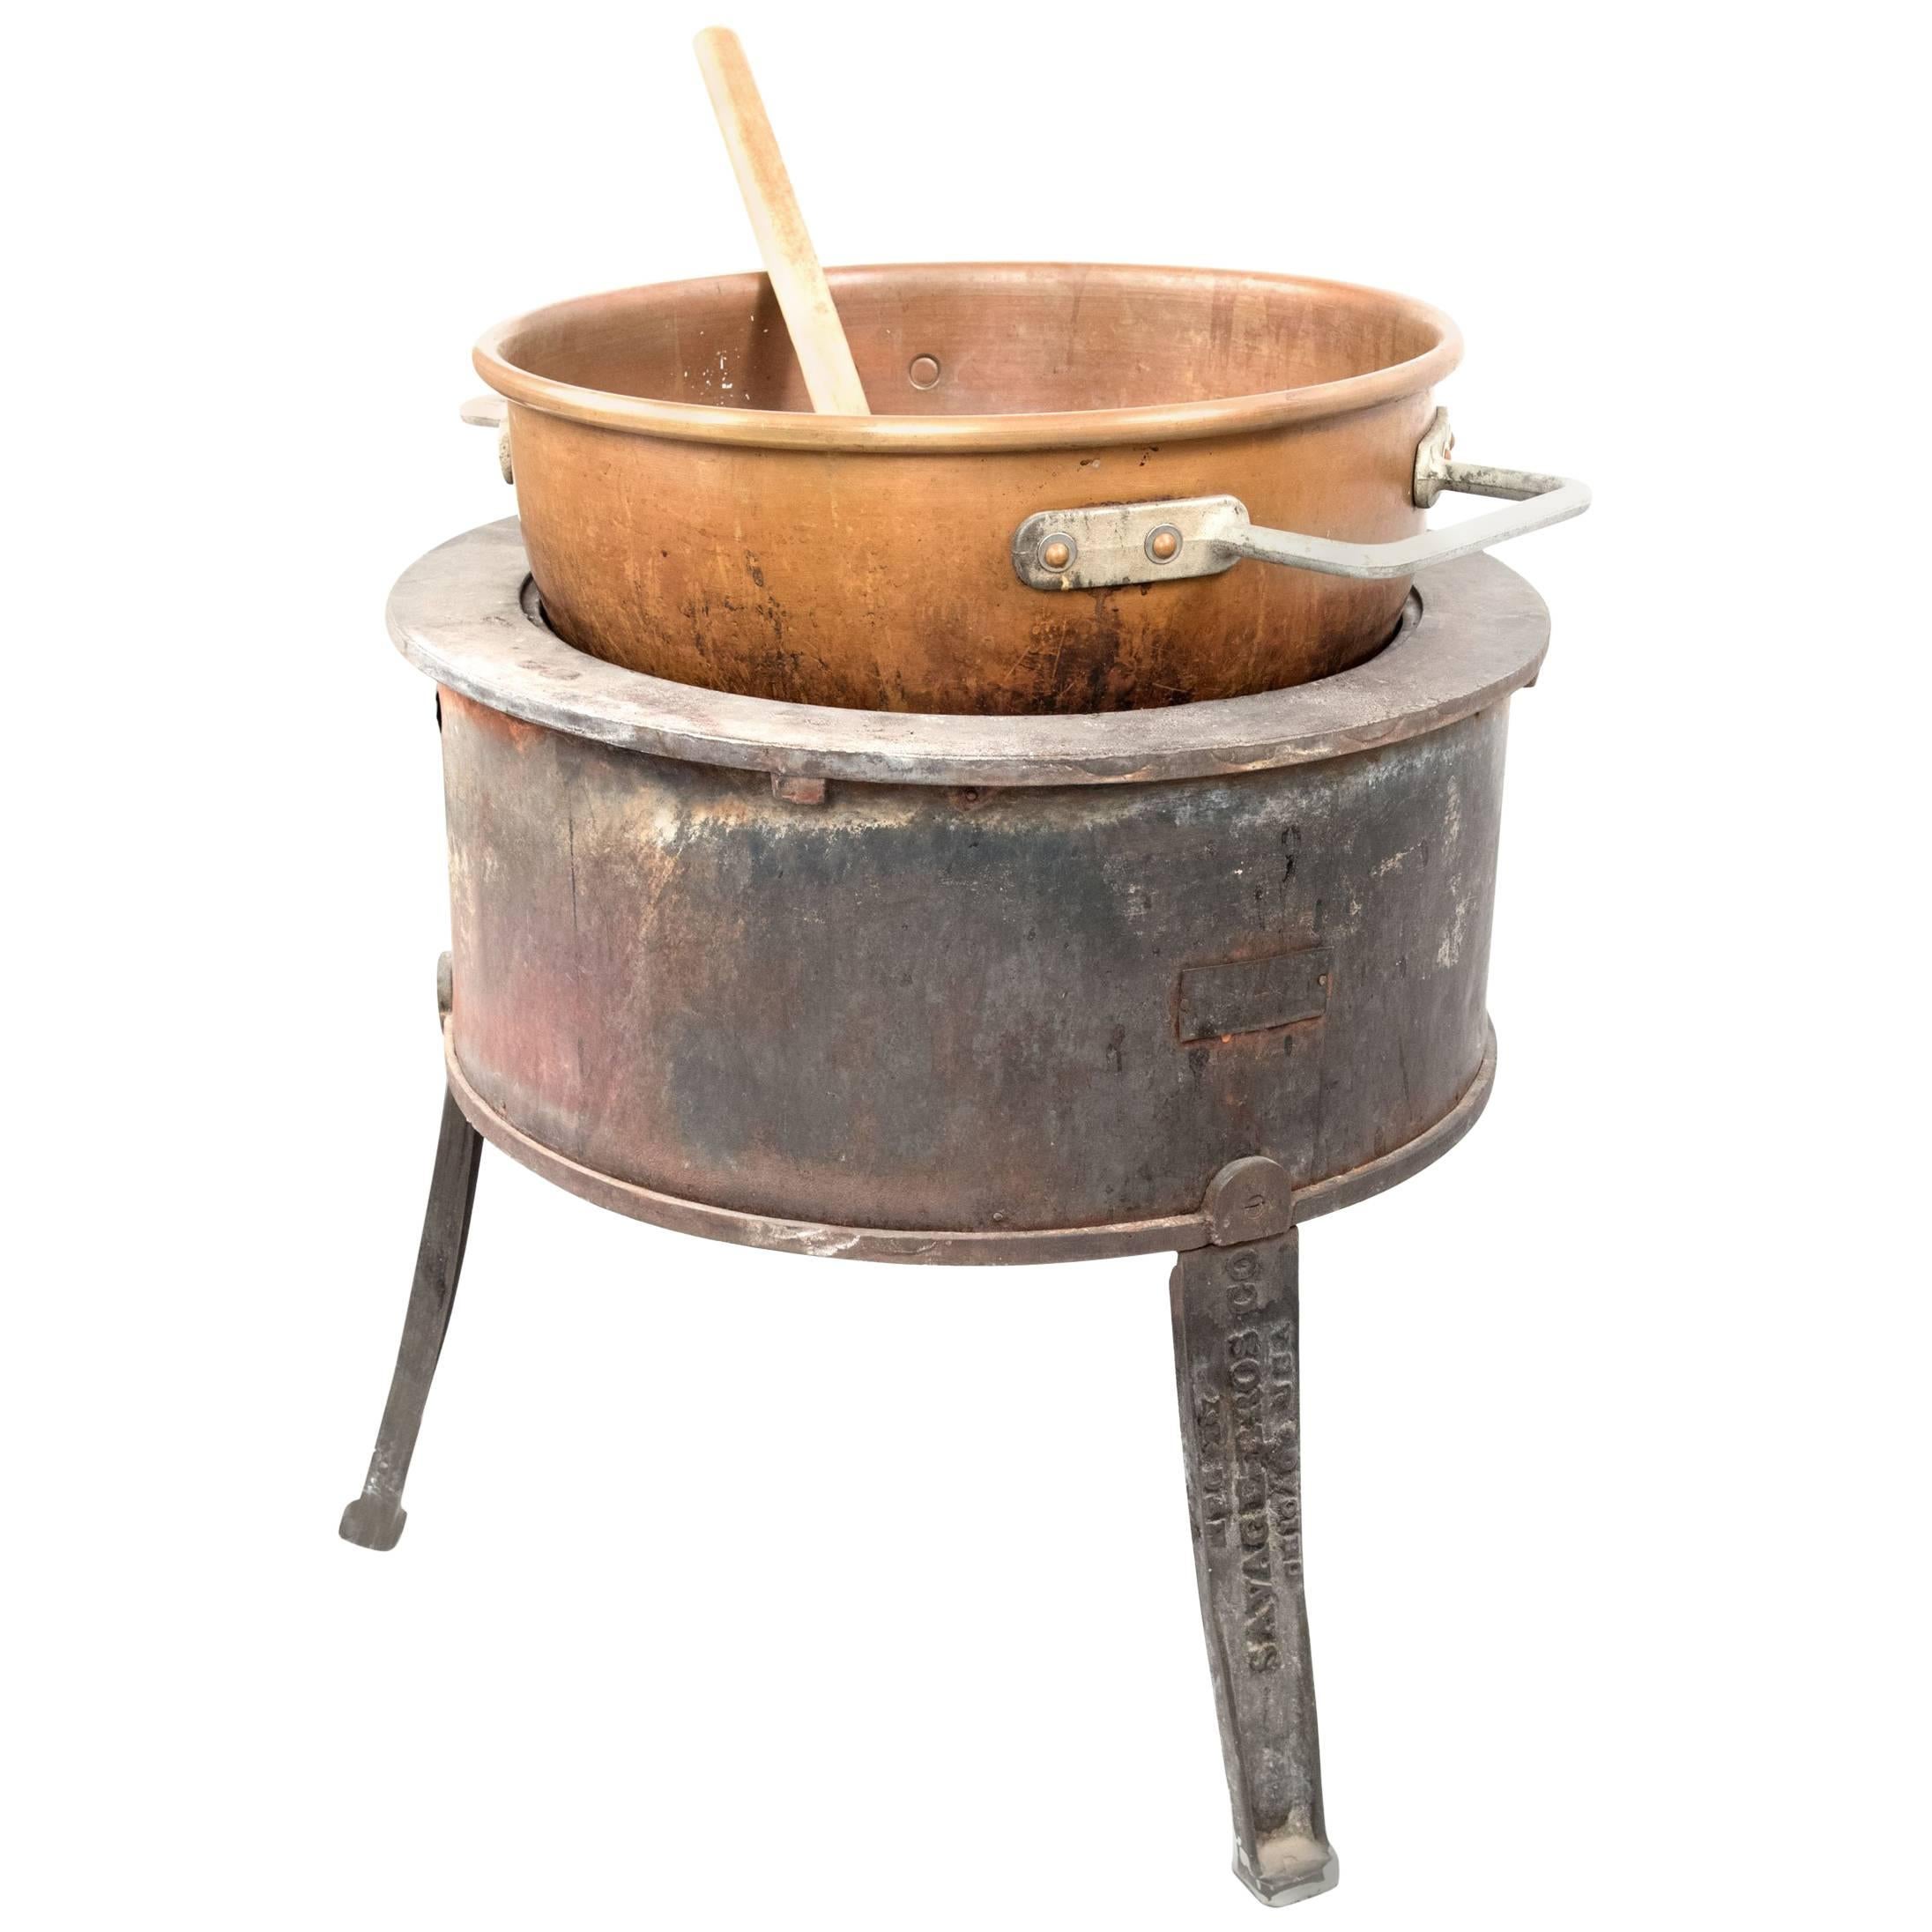 Large Candy-Making Copper Bowl and Gas Burner